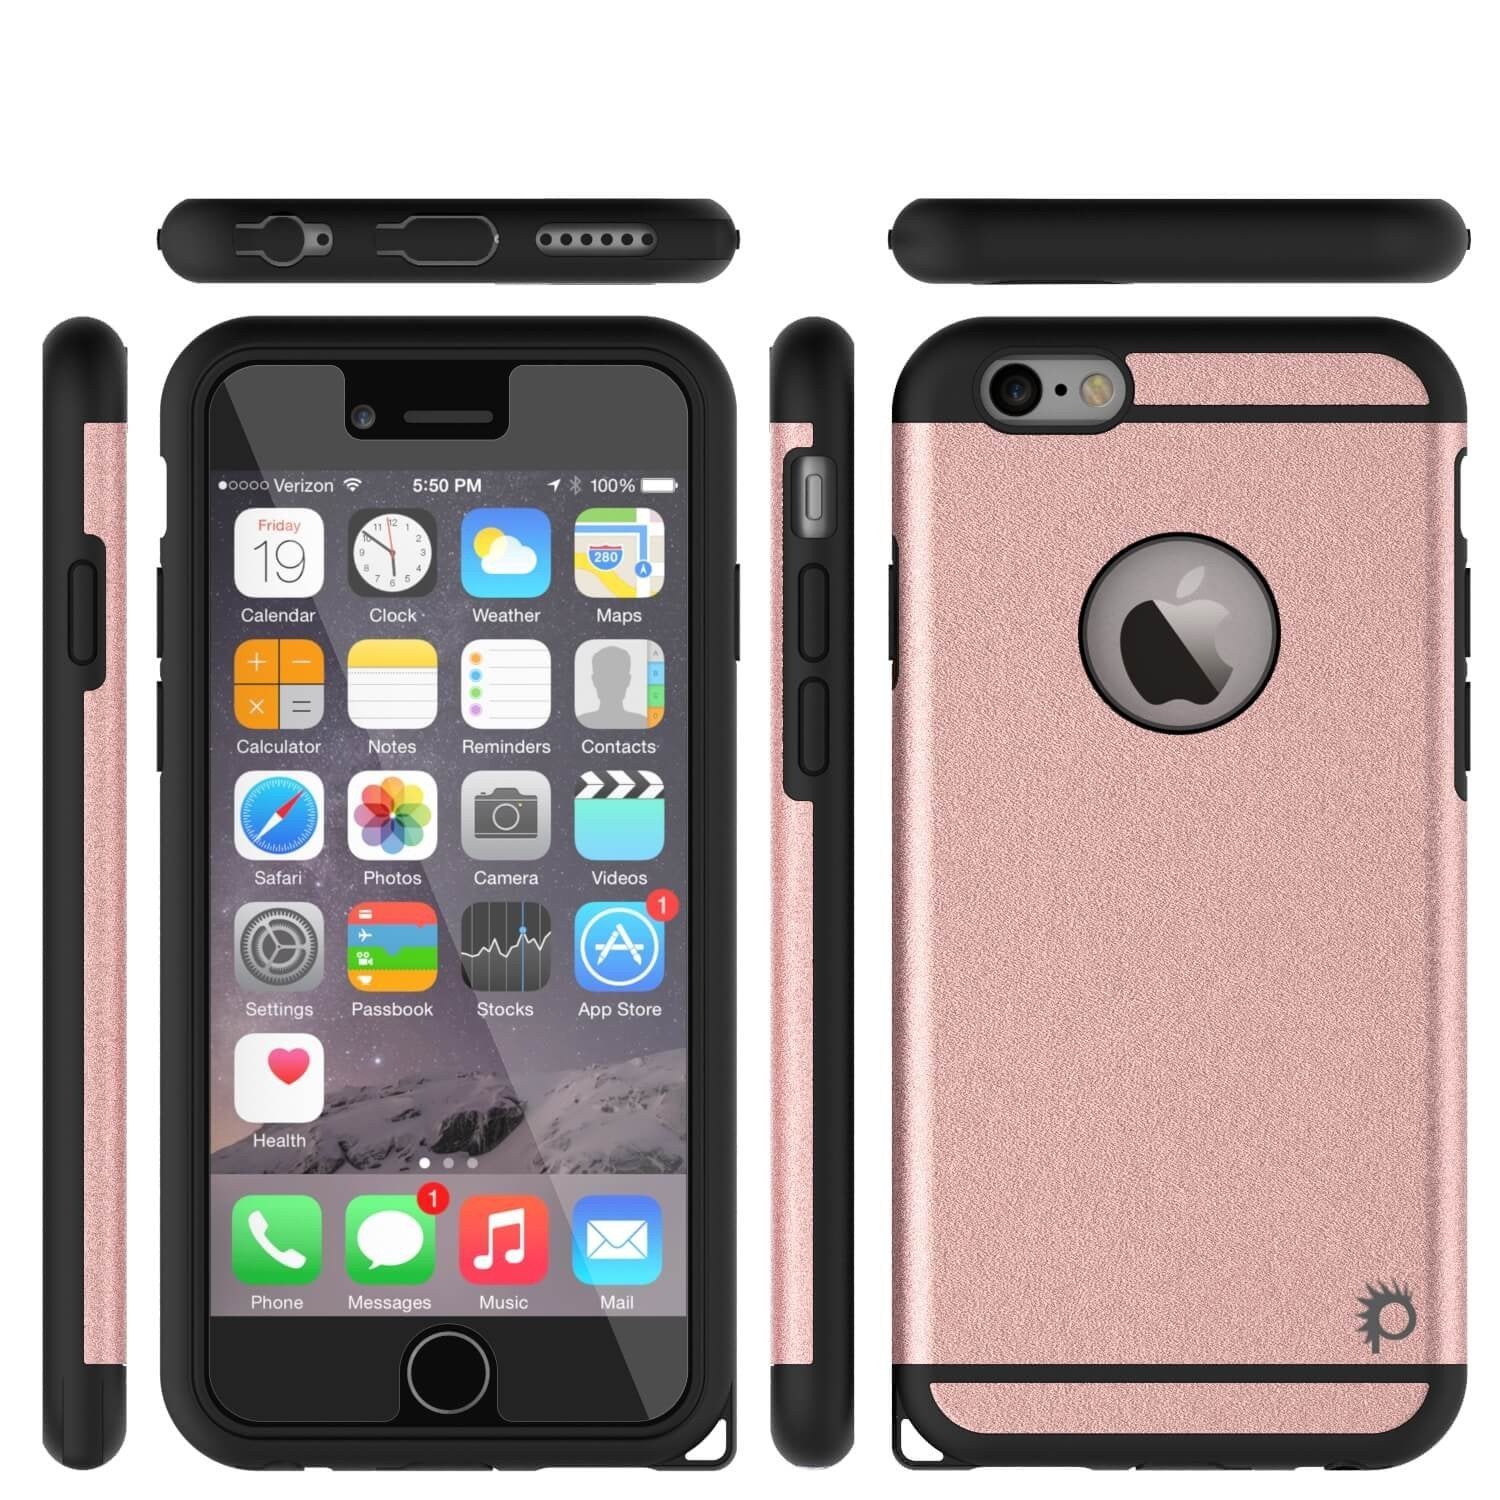 iPhone 5s/5 Case PunkCase Galactic pink Series Slim w/ Tempered Glass | Lifetime Warranty - PunkCase NZ